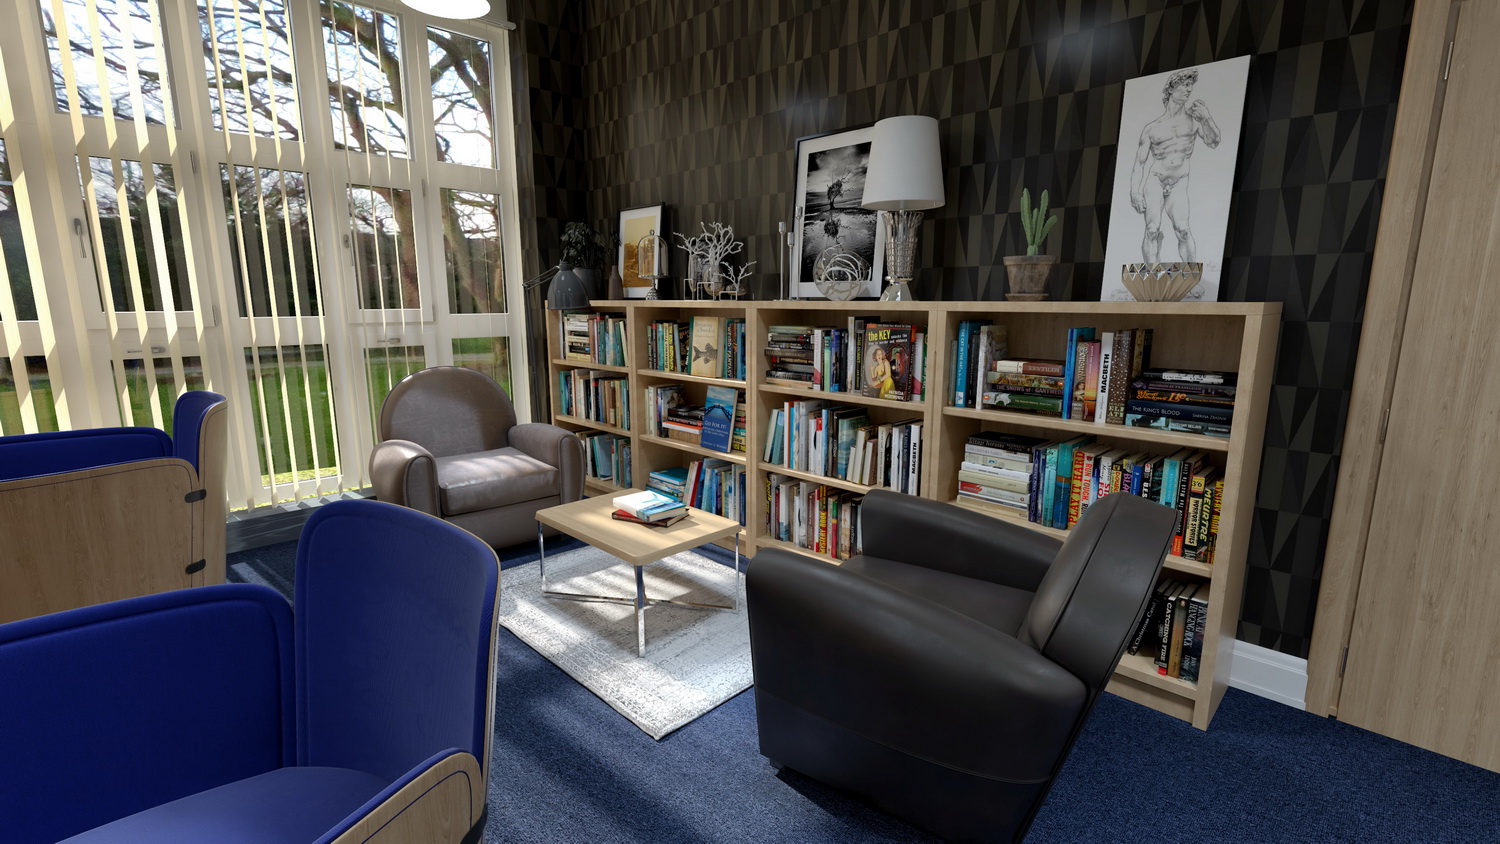 One of the rooms inside the Endsleigh Park development.